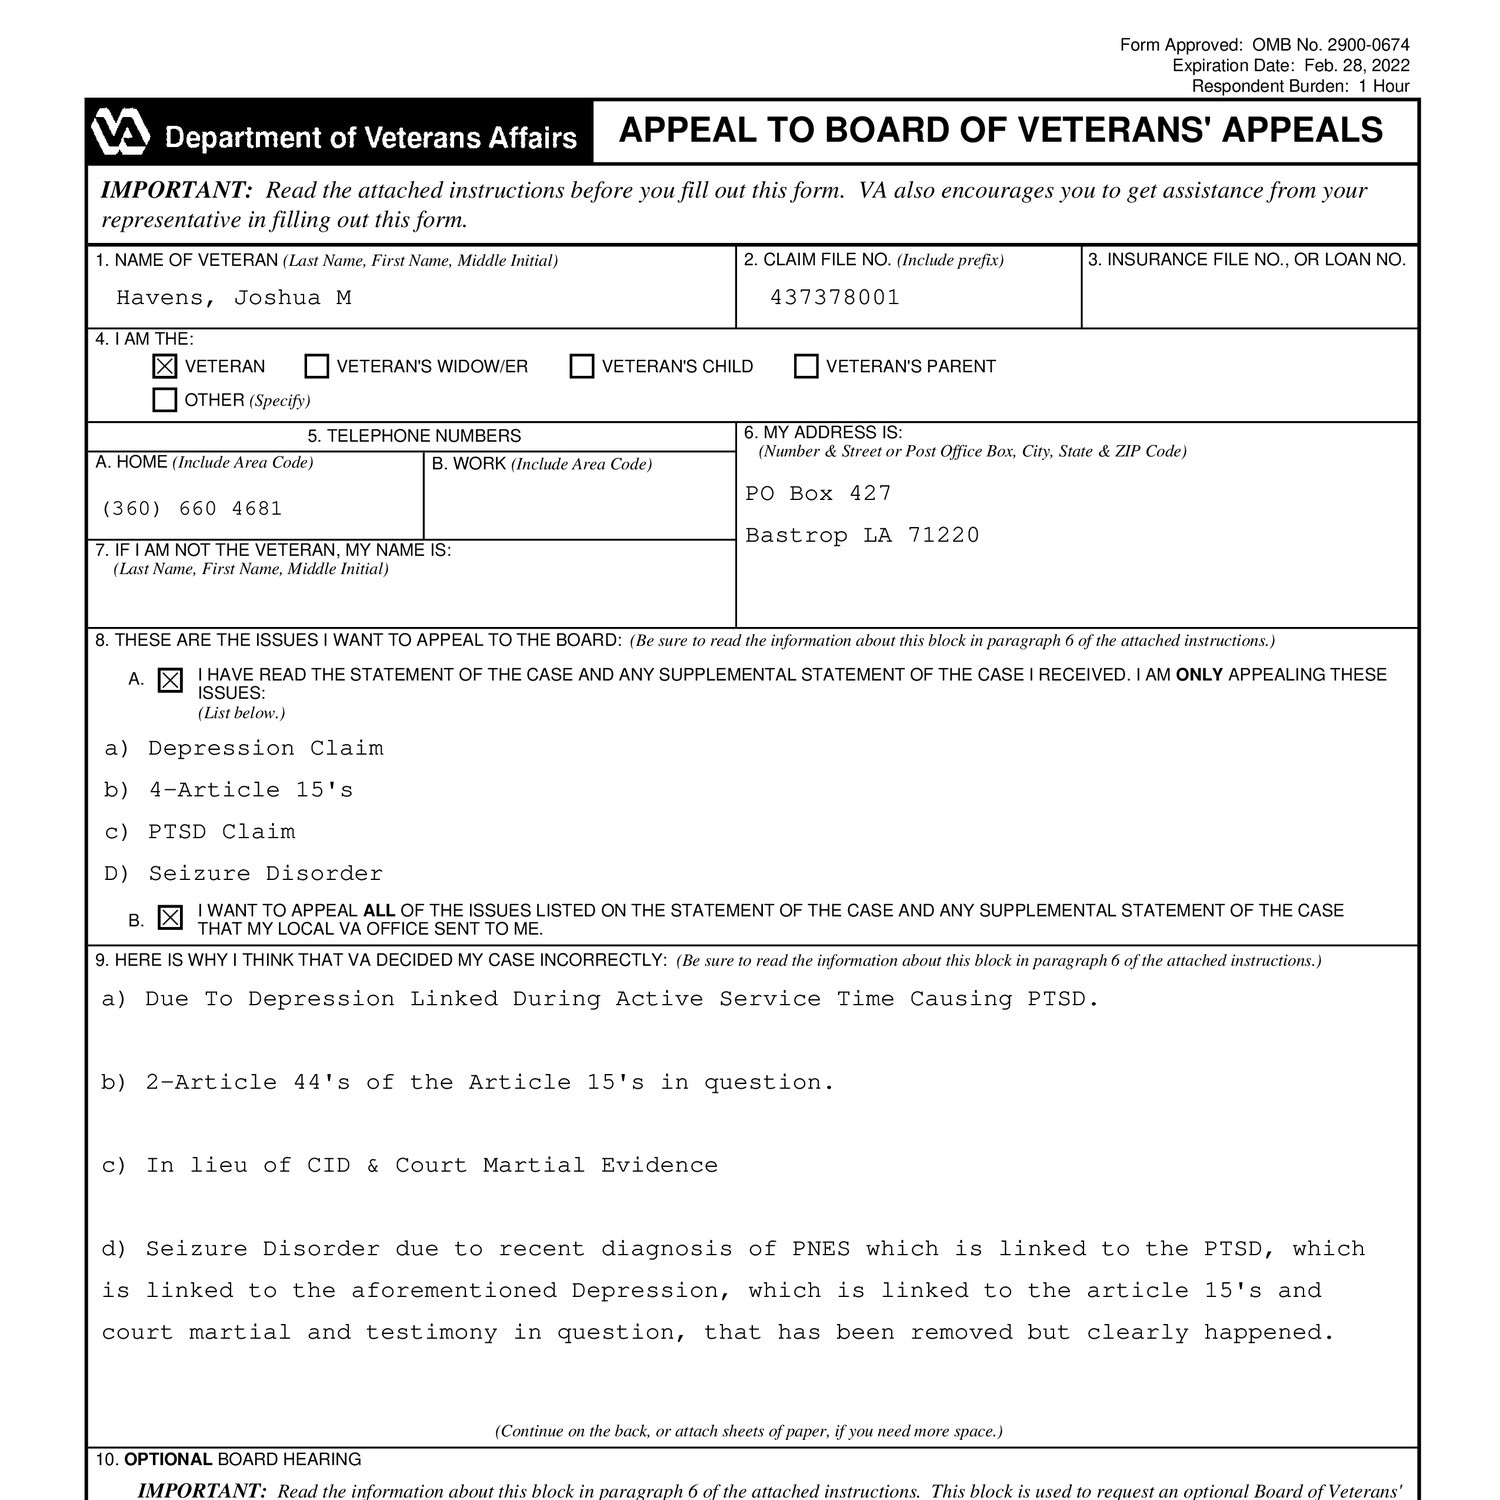 va-form-9-appeal-to-board-of-veterans-appeals-pdf-docdroid